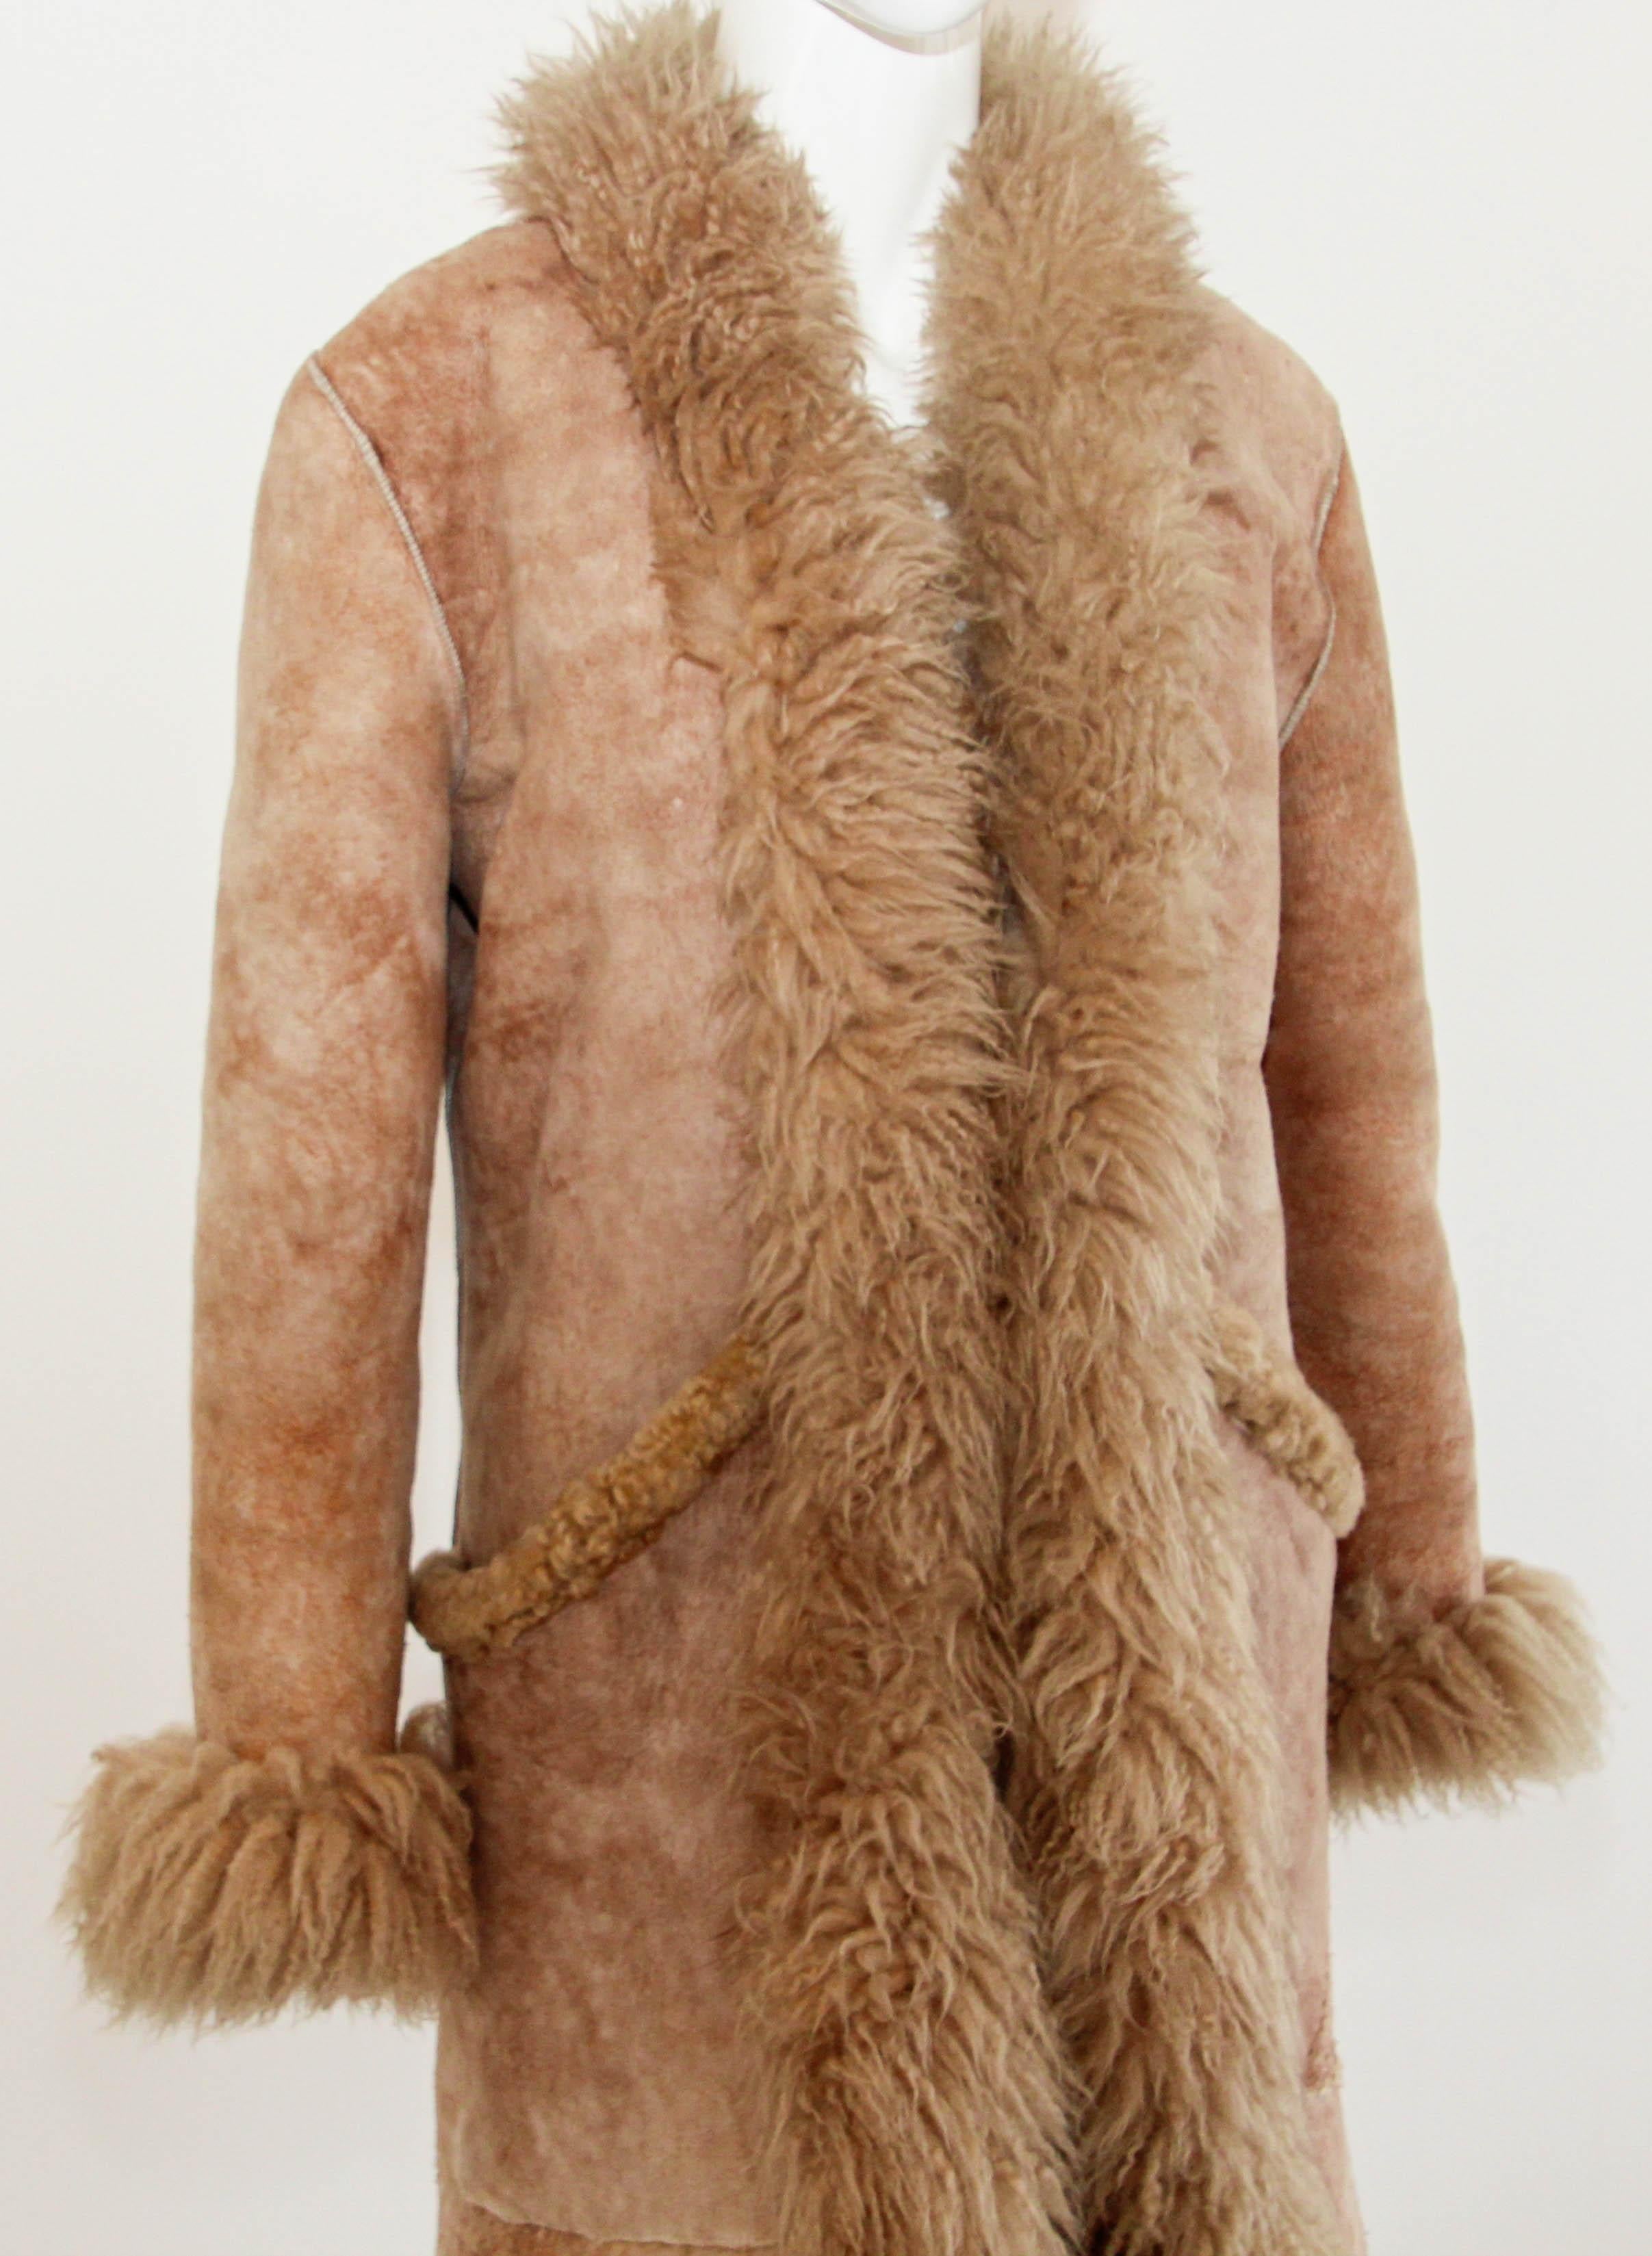 Vintage brown sheepskin fur coat Australia 1960's, 70's.
Vintage Maxi long organic sheepskin coat 100% genuine organic sheepskin, made in Australia by AUSFURS.
Incredibly beautiful coat made of real suede leather trimmed with thick, shiny hair from